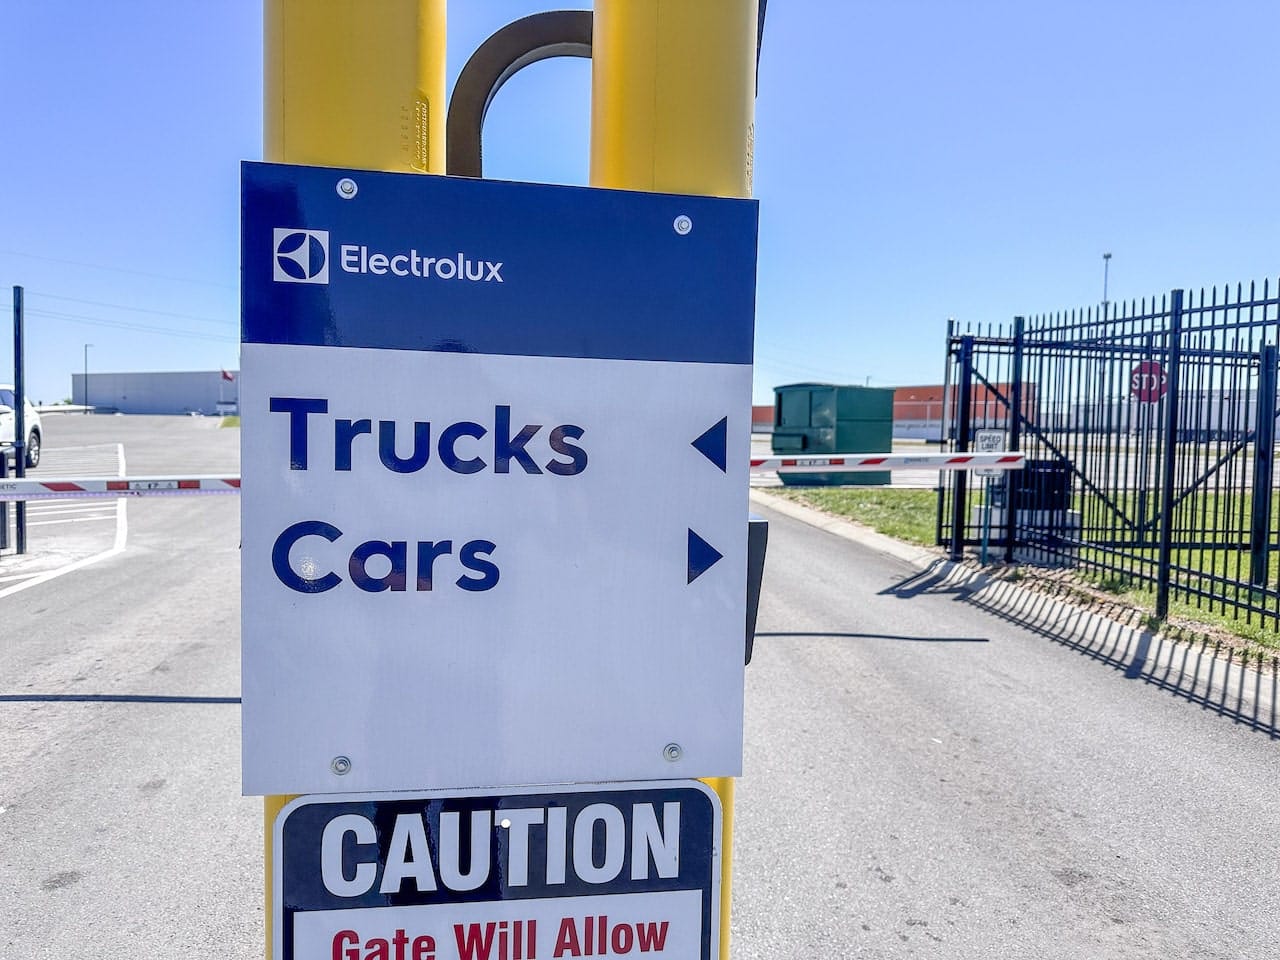 Electrolux banner for guiding separation of trucks and cars at parking.